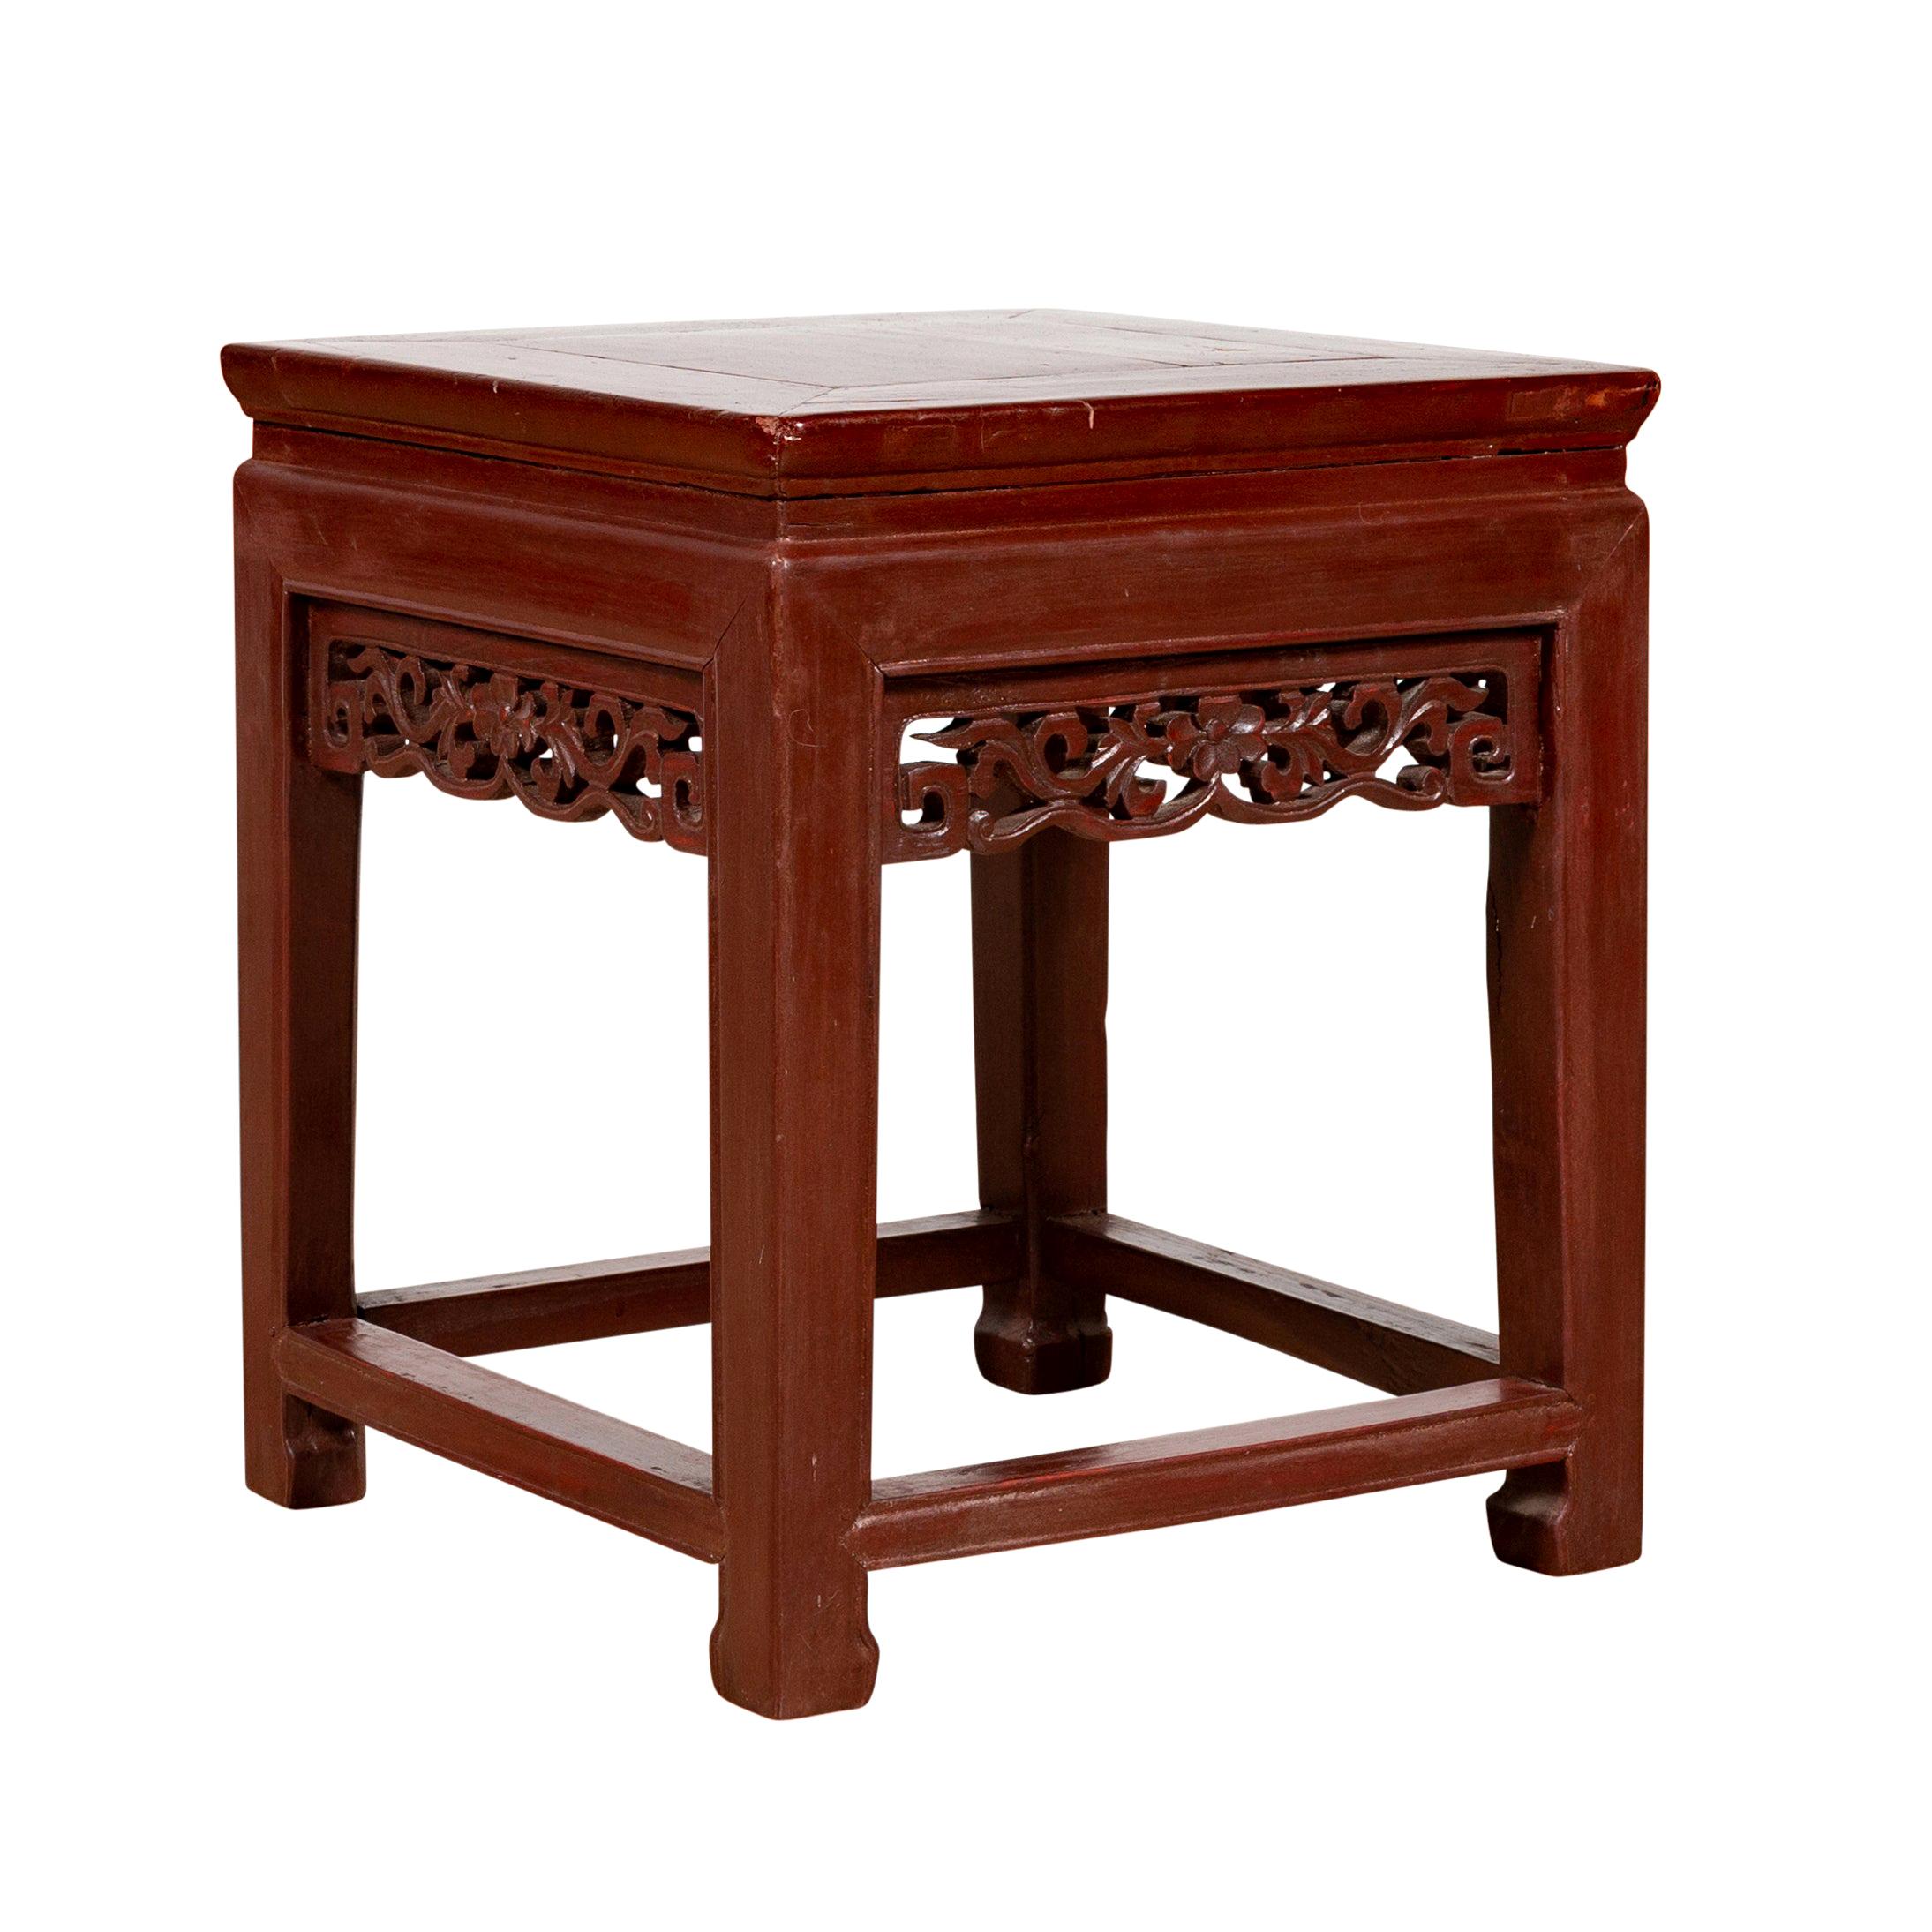 Vintage Chinese Side Table with Dark Red Patina and Foliage Hand Carved Apron